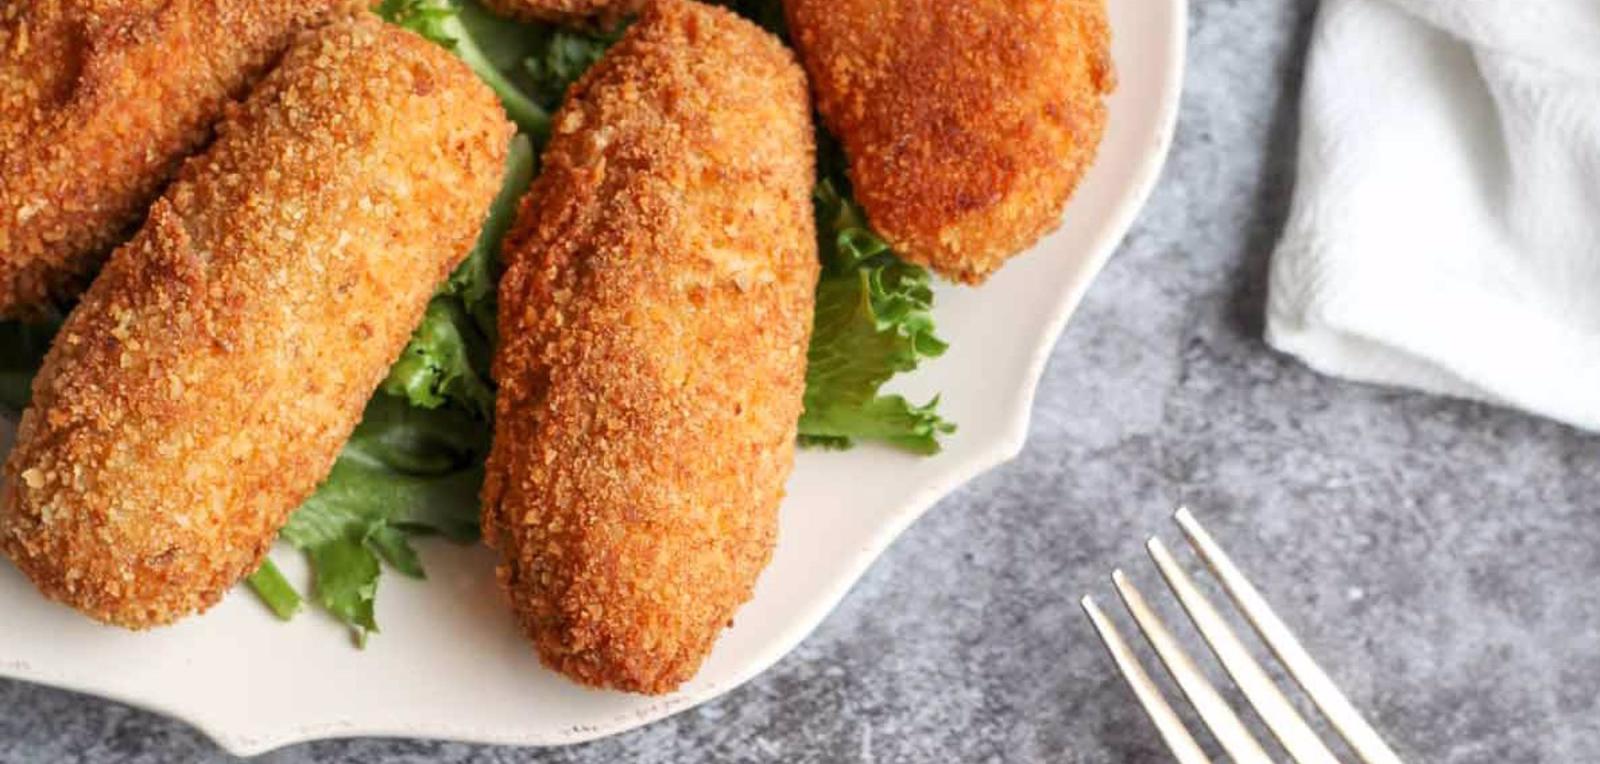 Croquette, somewhat crunchy but very tasty